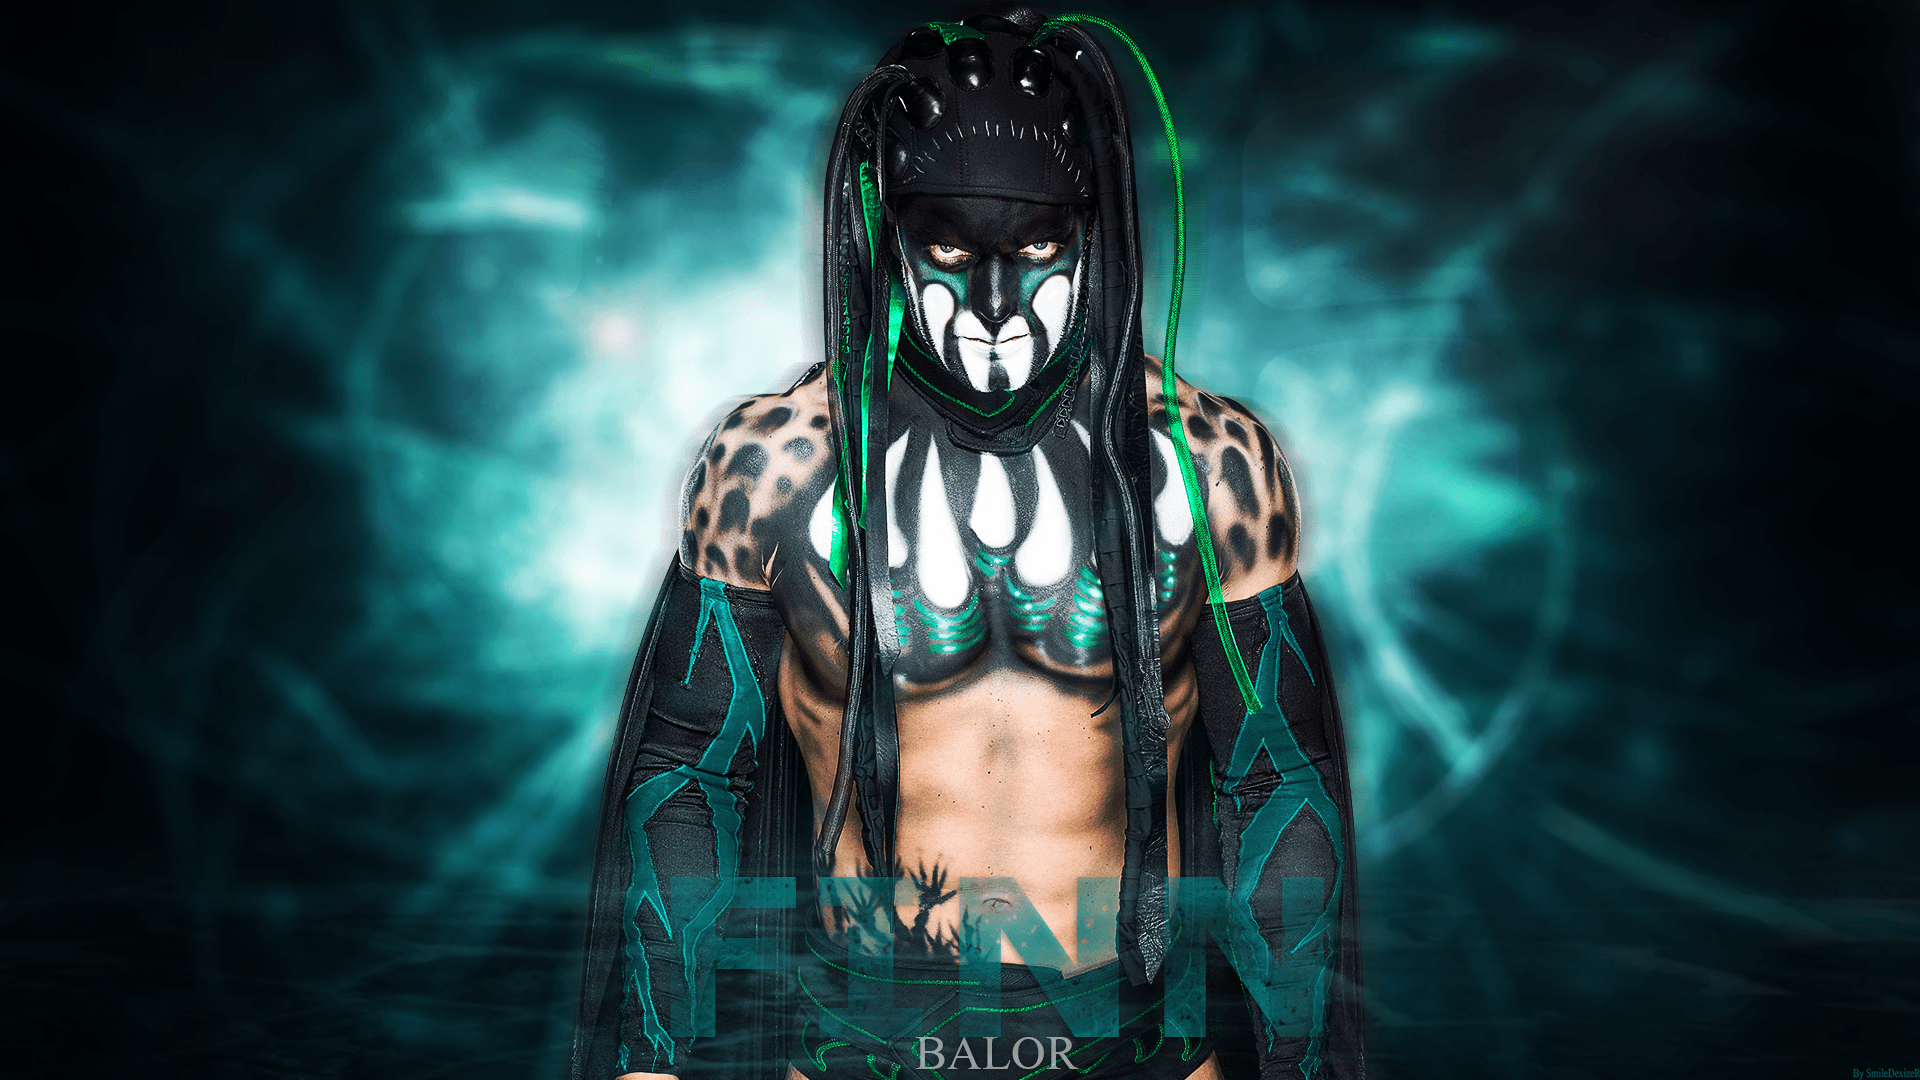 Pictures of Finn Balor Wallpapers.